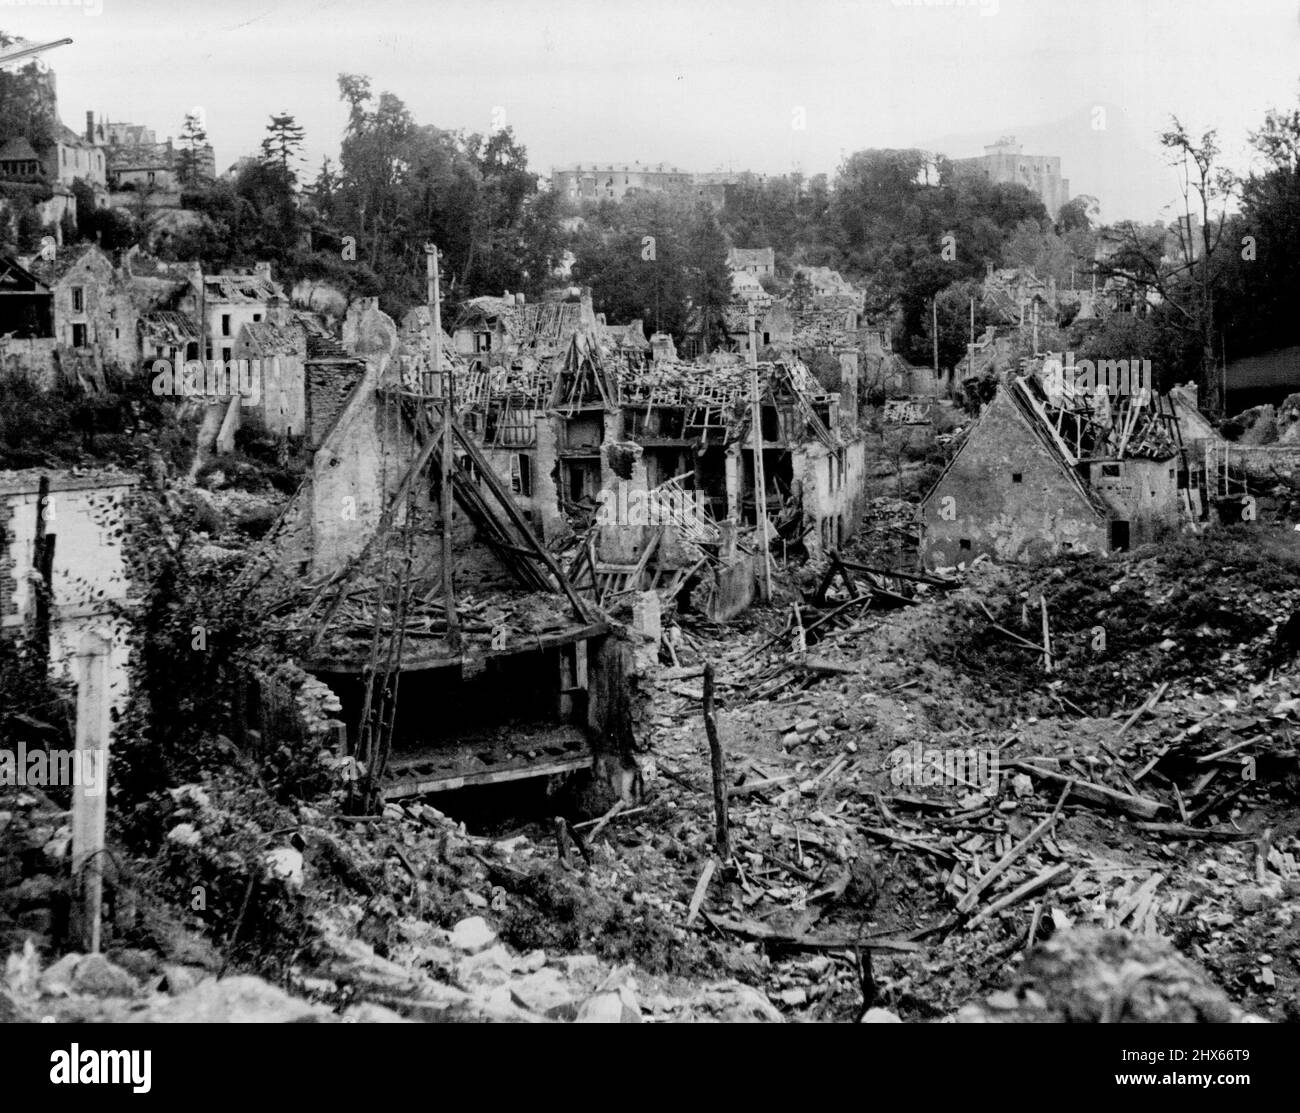 Accurate Allied bombing laid waste to this section of a French city which the Germans defended vigorously but in vain. October 2, 1944. (Canadian Army - W.I.B.). Stock Photo